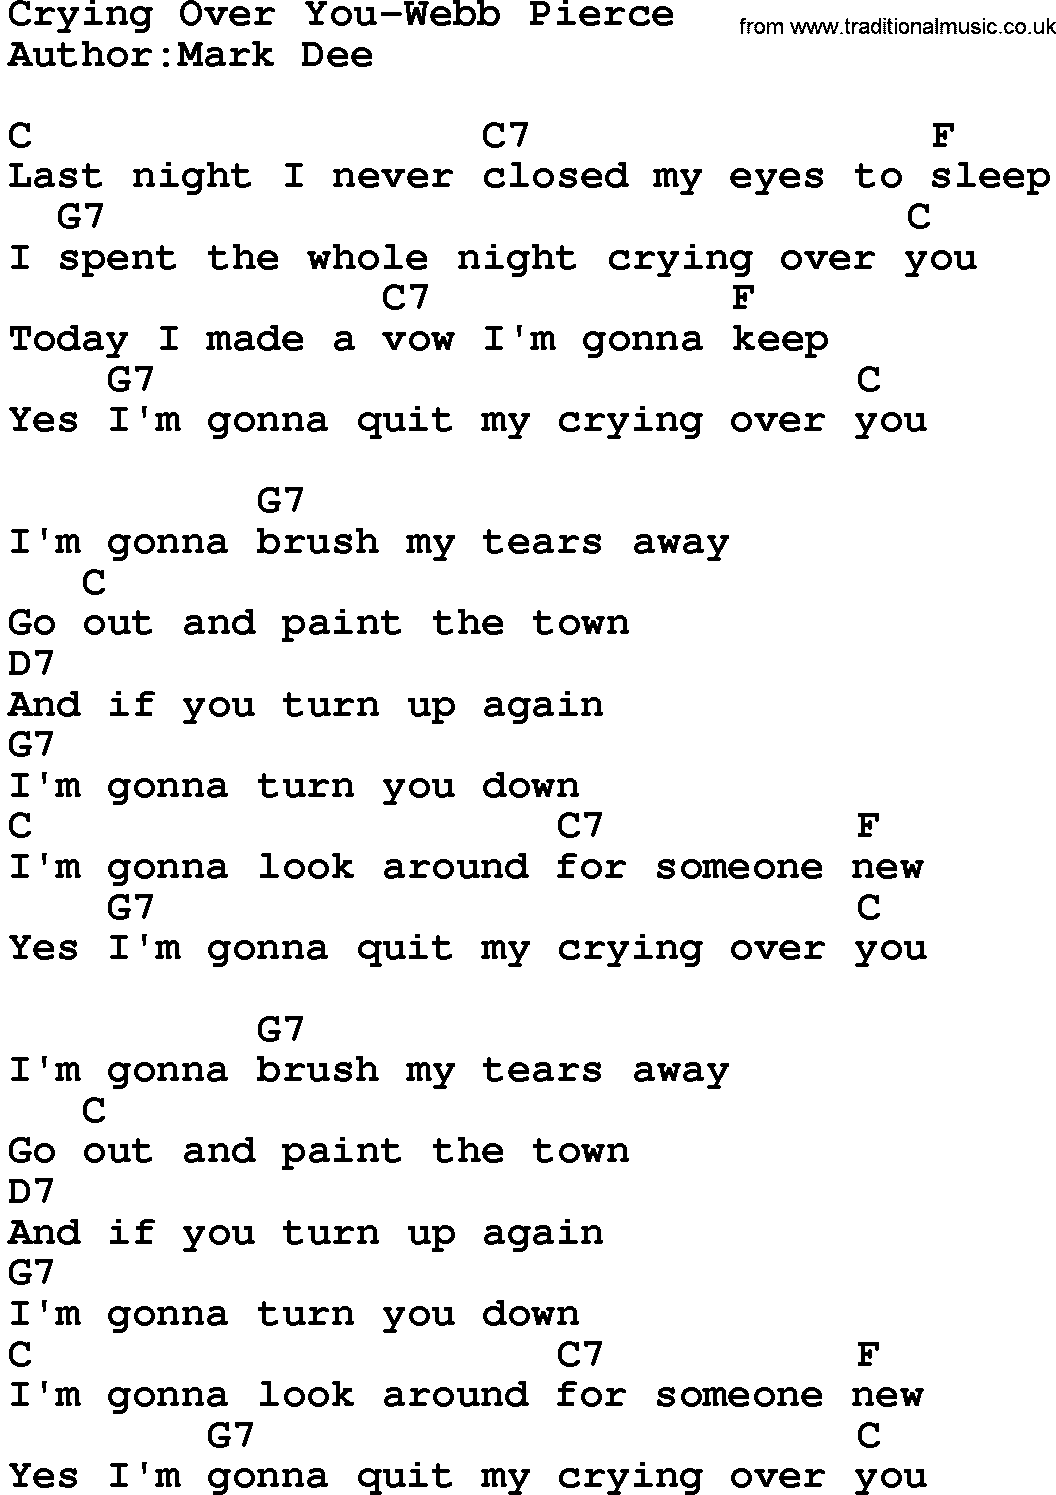 Country music song: Crying Over You-Webb Pierce lyrics and chords